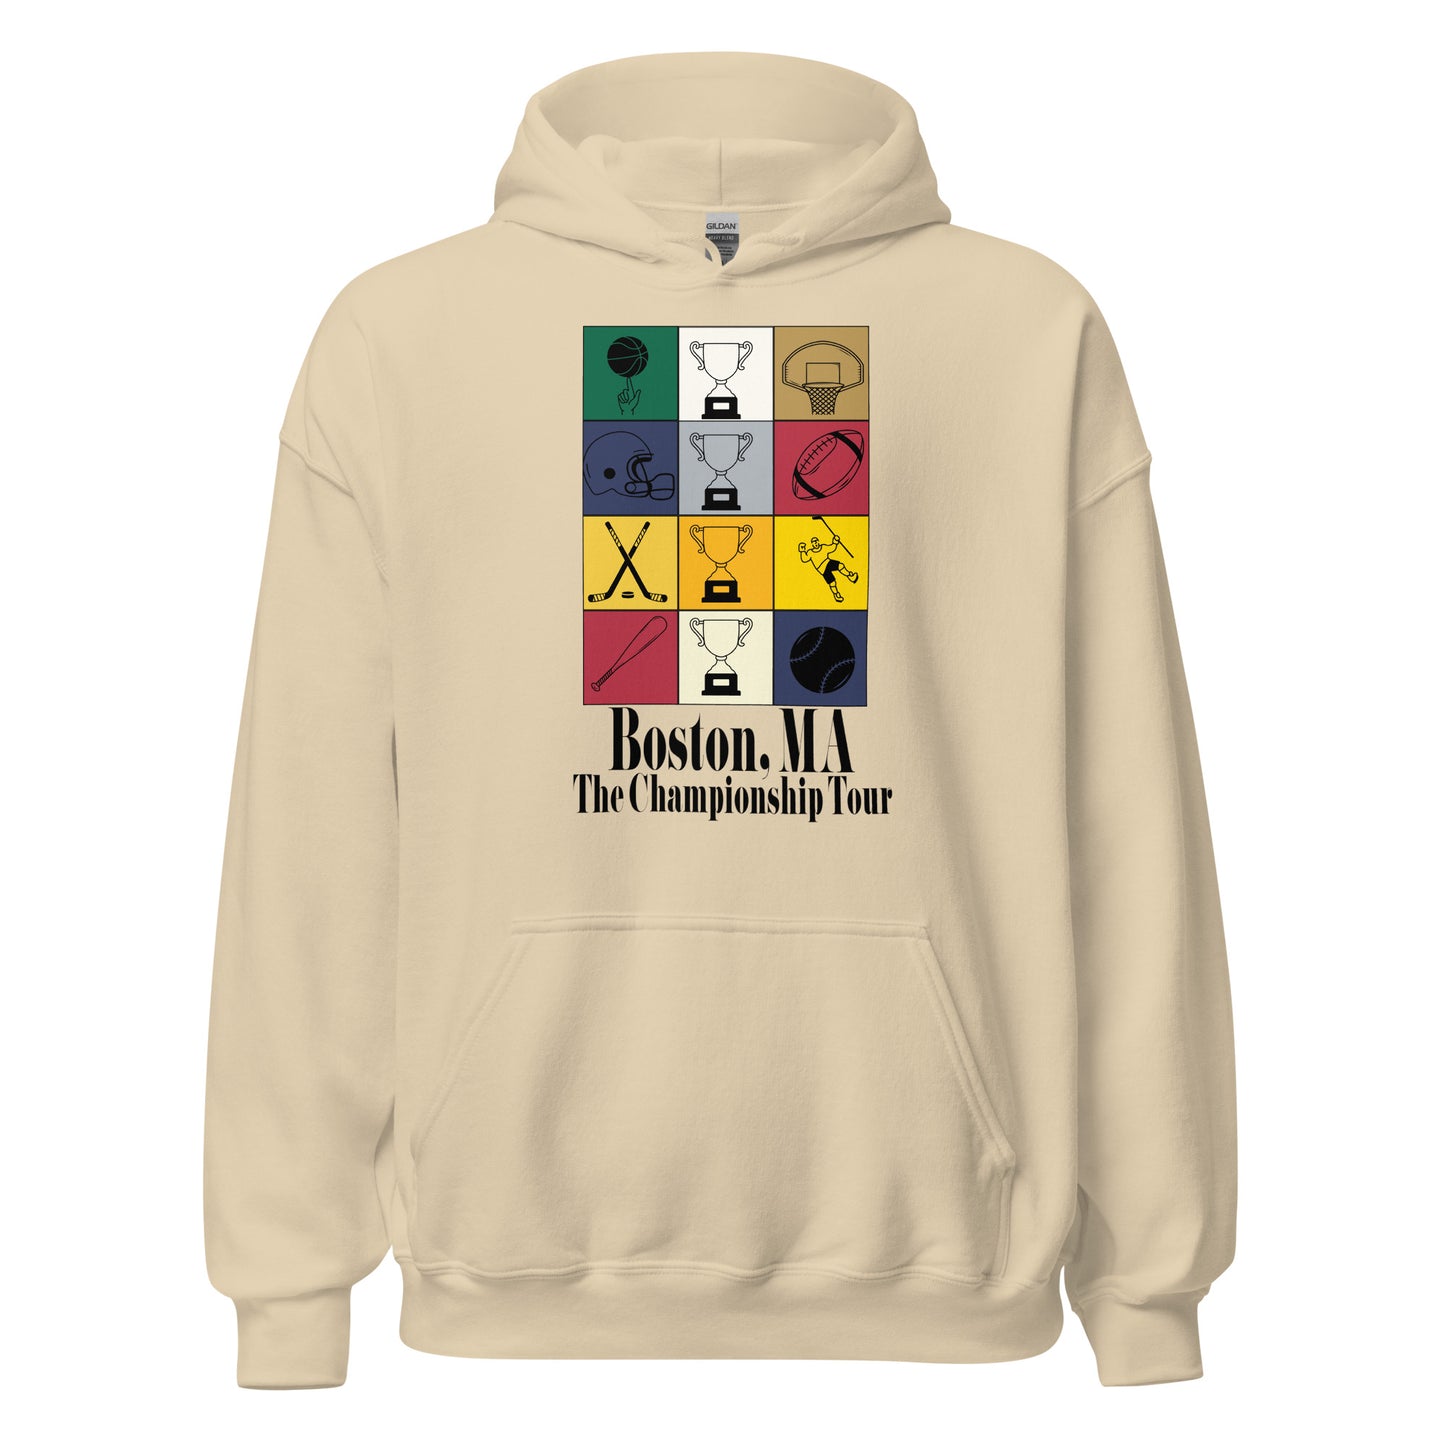 The Championship Tour Hoodie